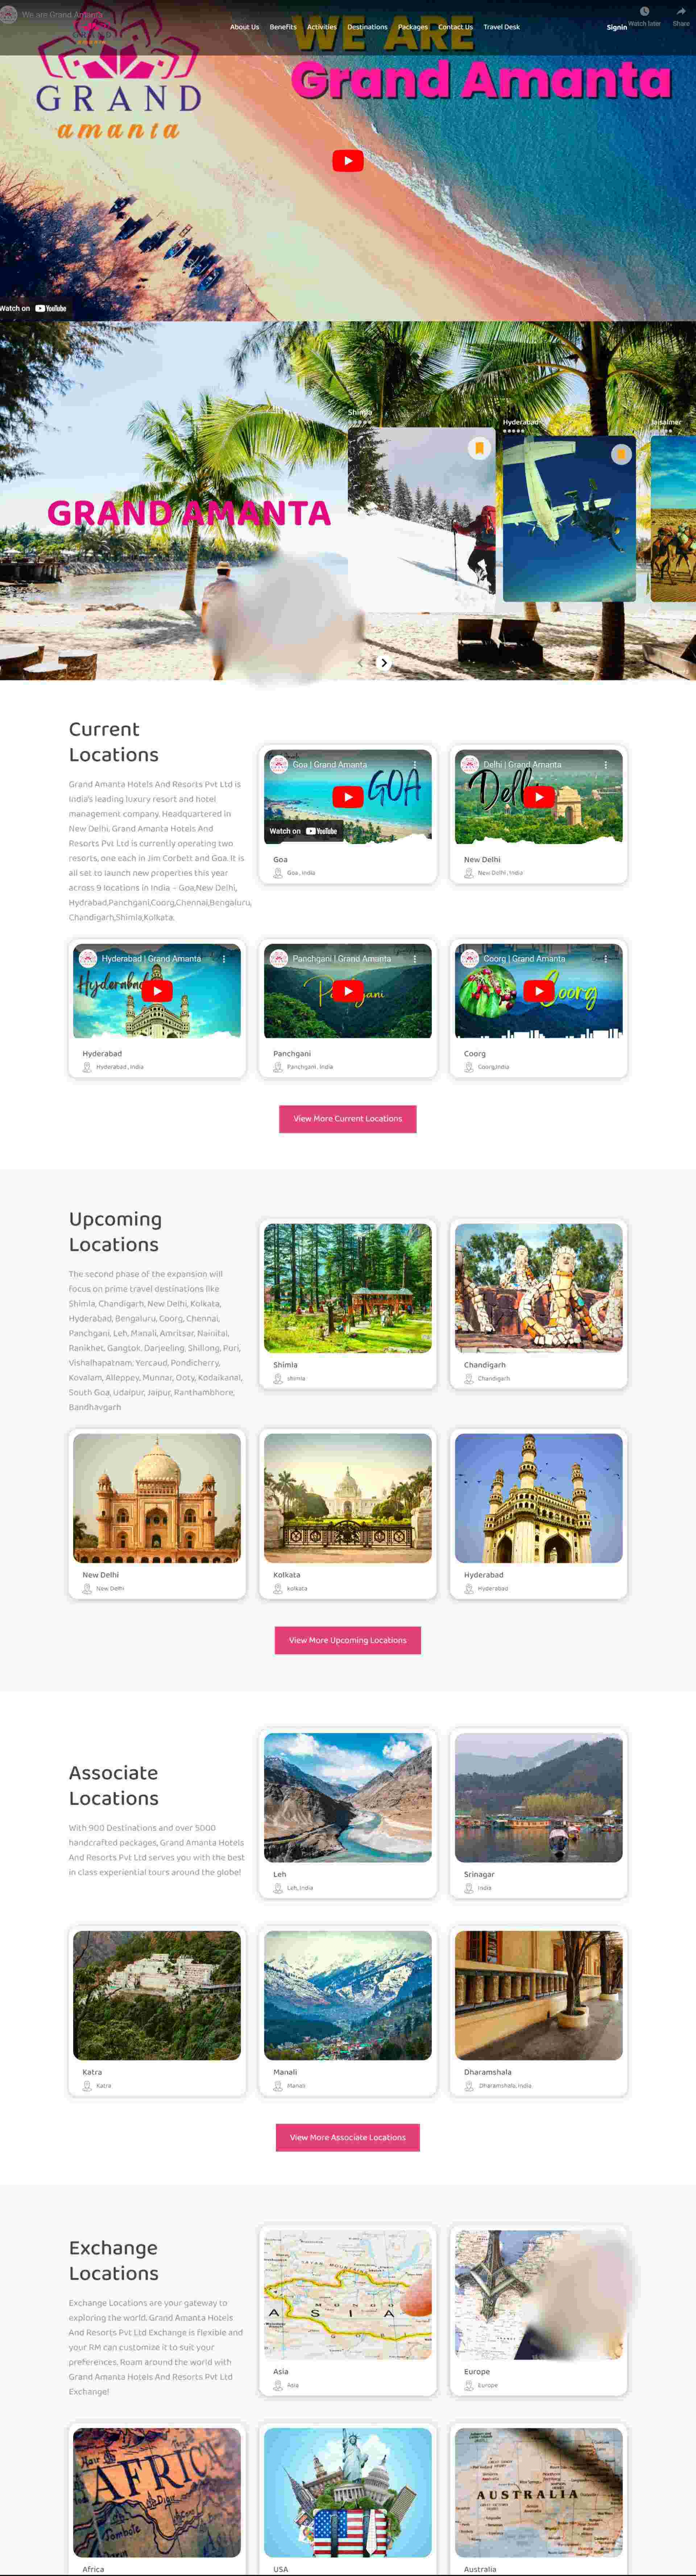 Grand amanta tour and travel website designed & developed by ElySpace